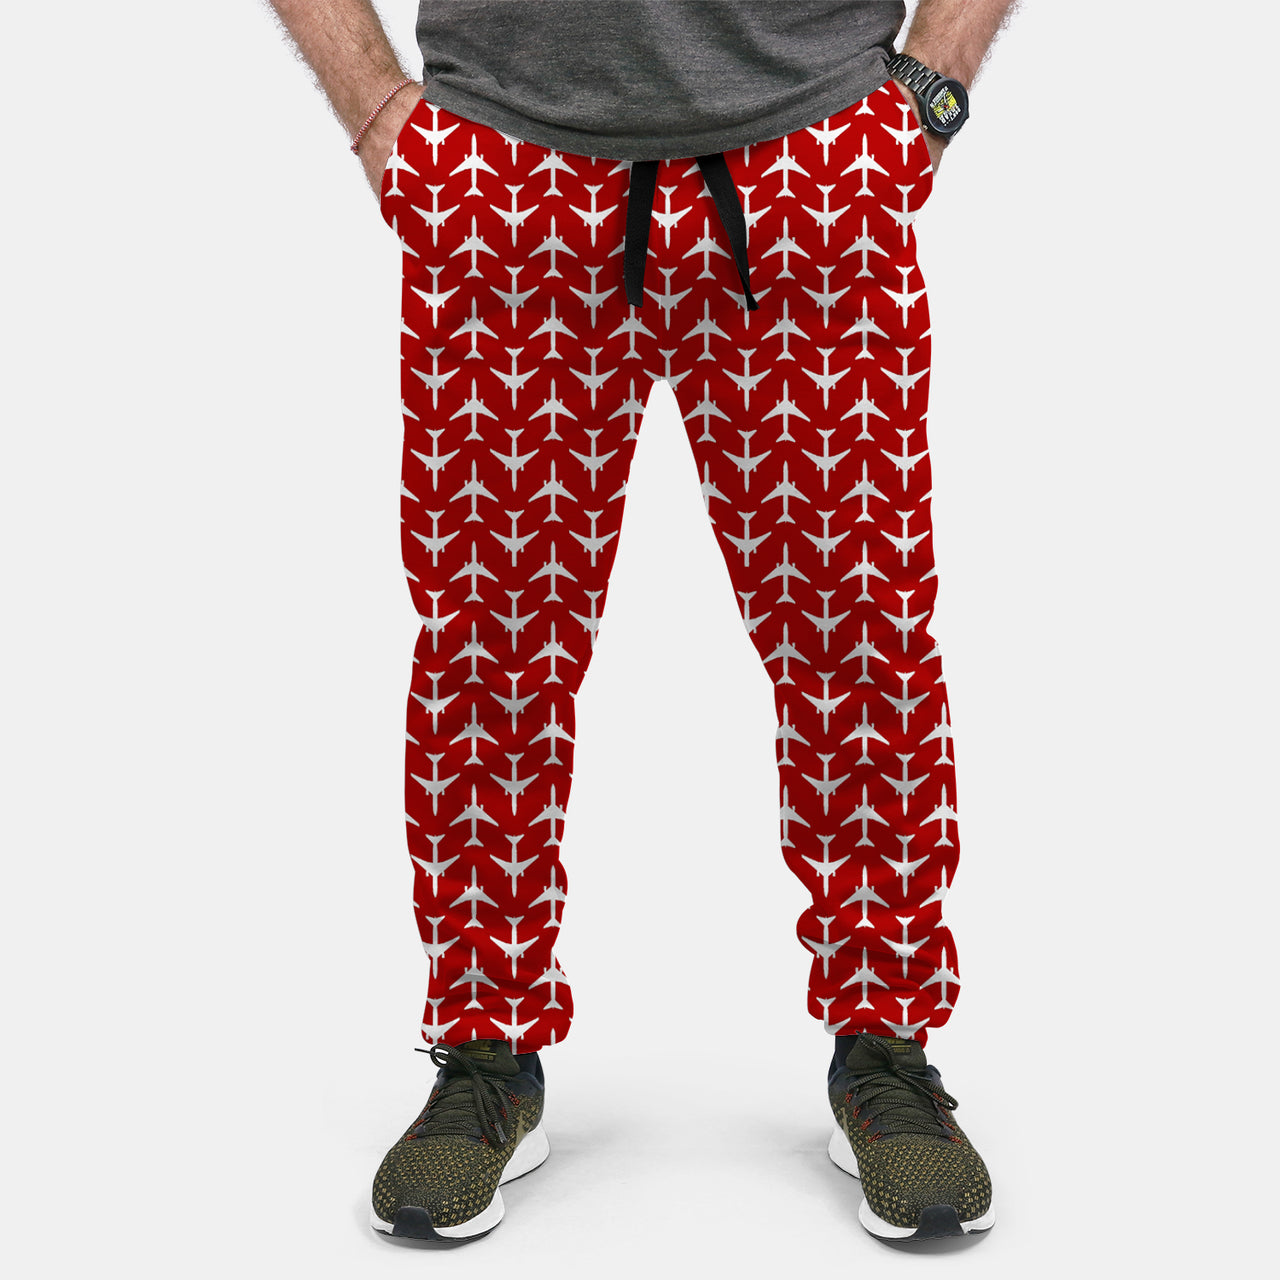 Perfectly Sized Seamless Airplanes Red Designed Sweat Pants & Trousers